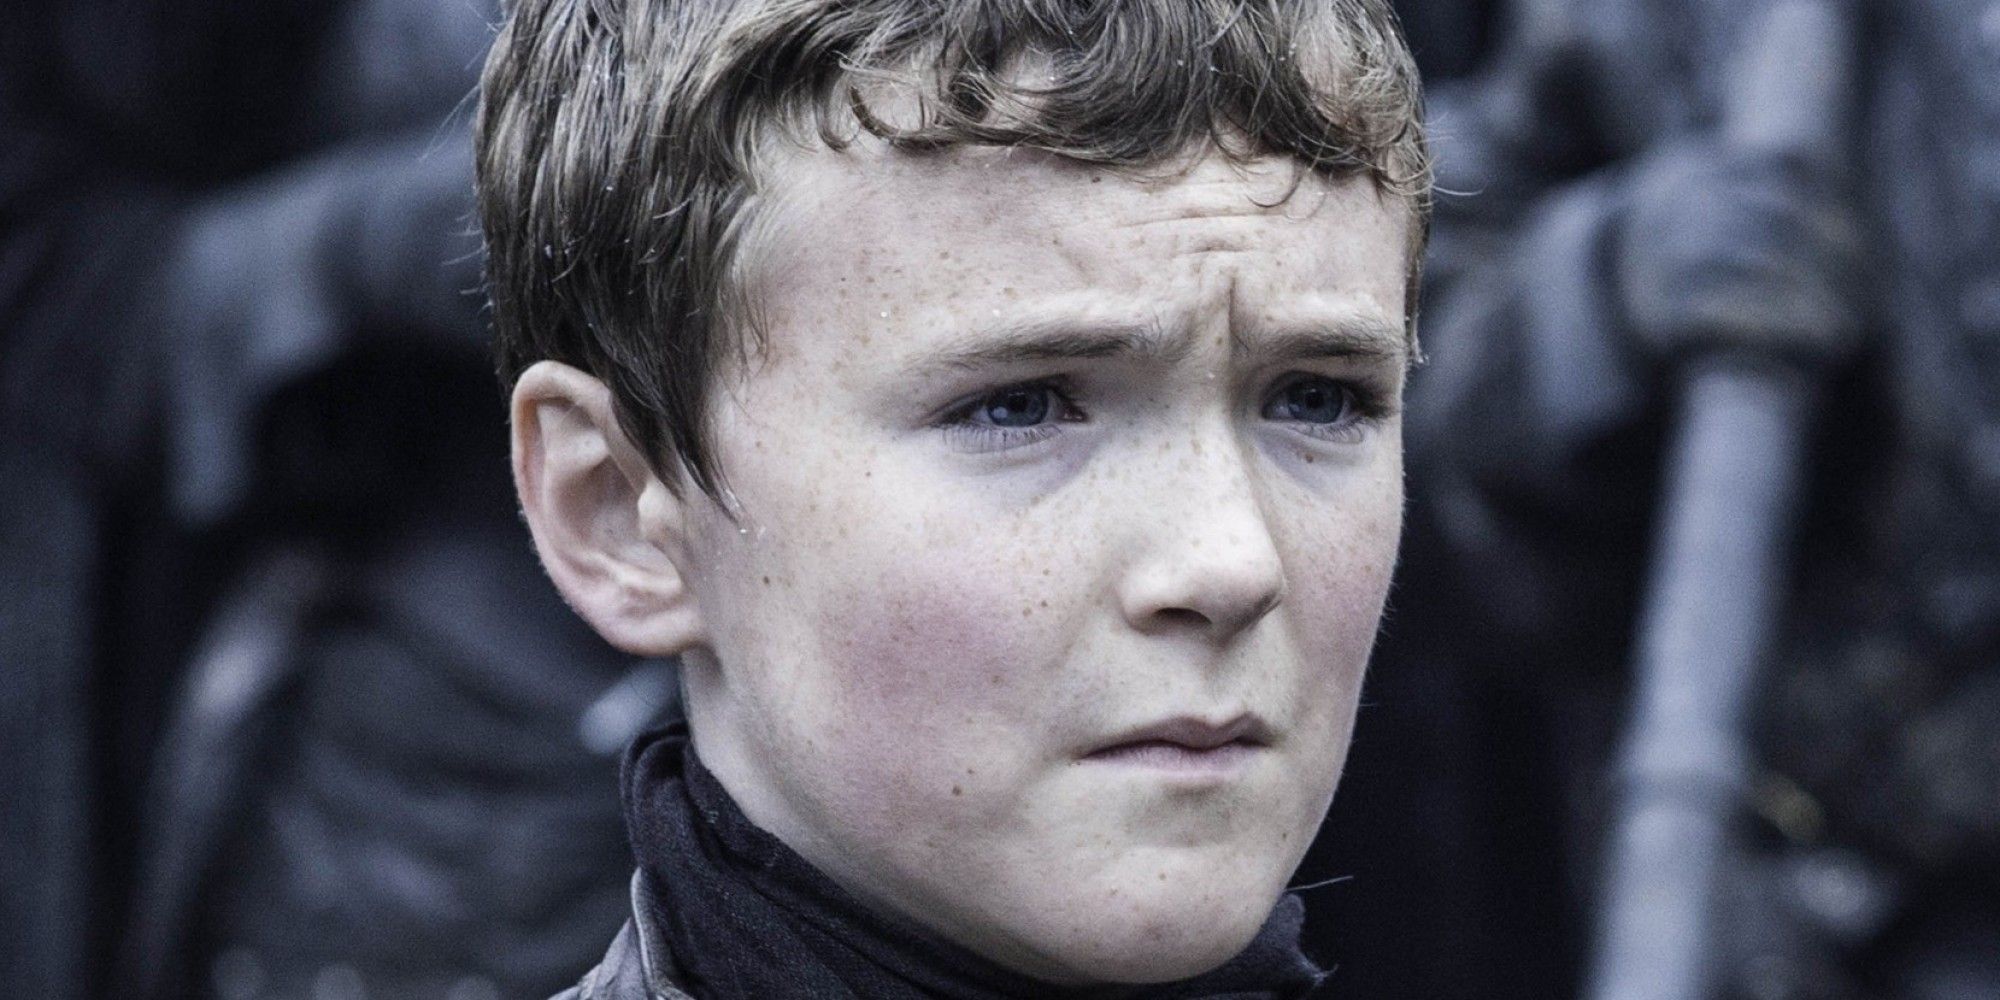 Olly looking sad as Castle Black in Game of Thrones